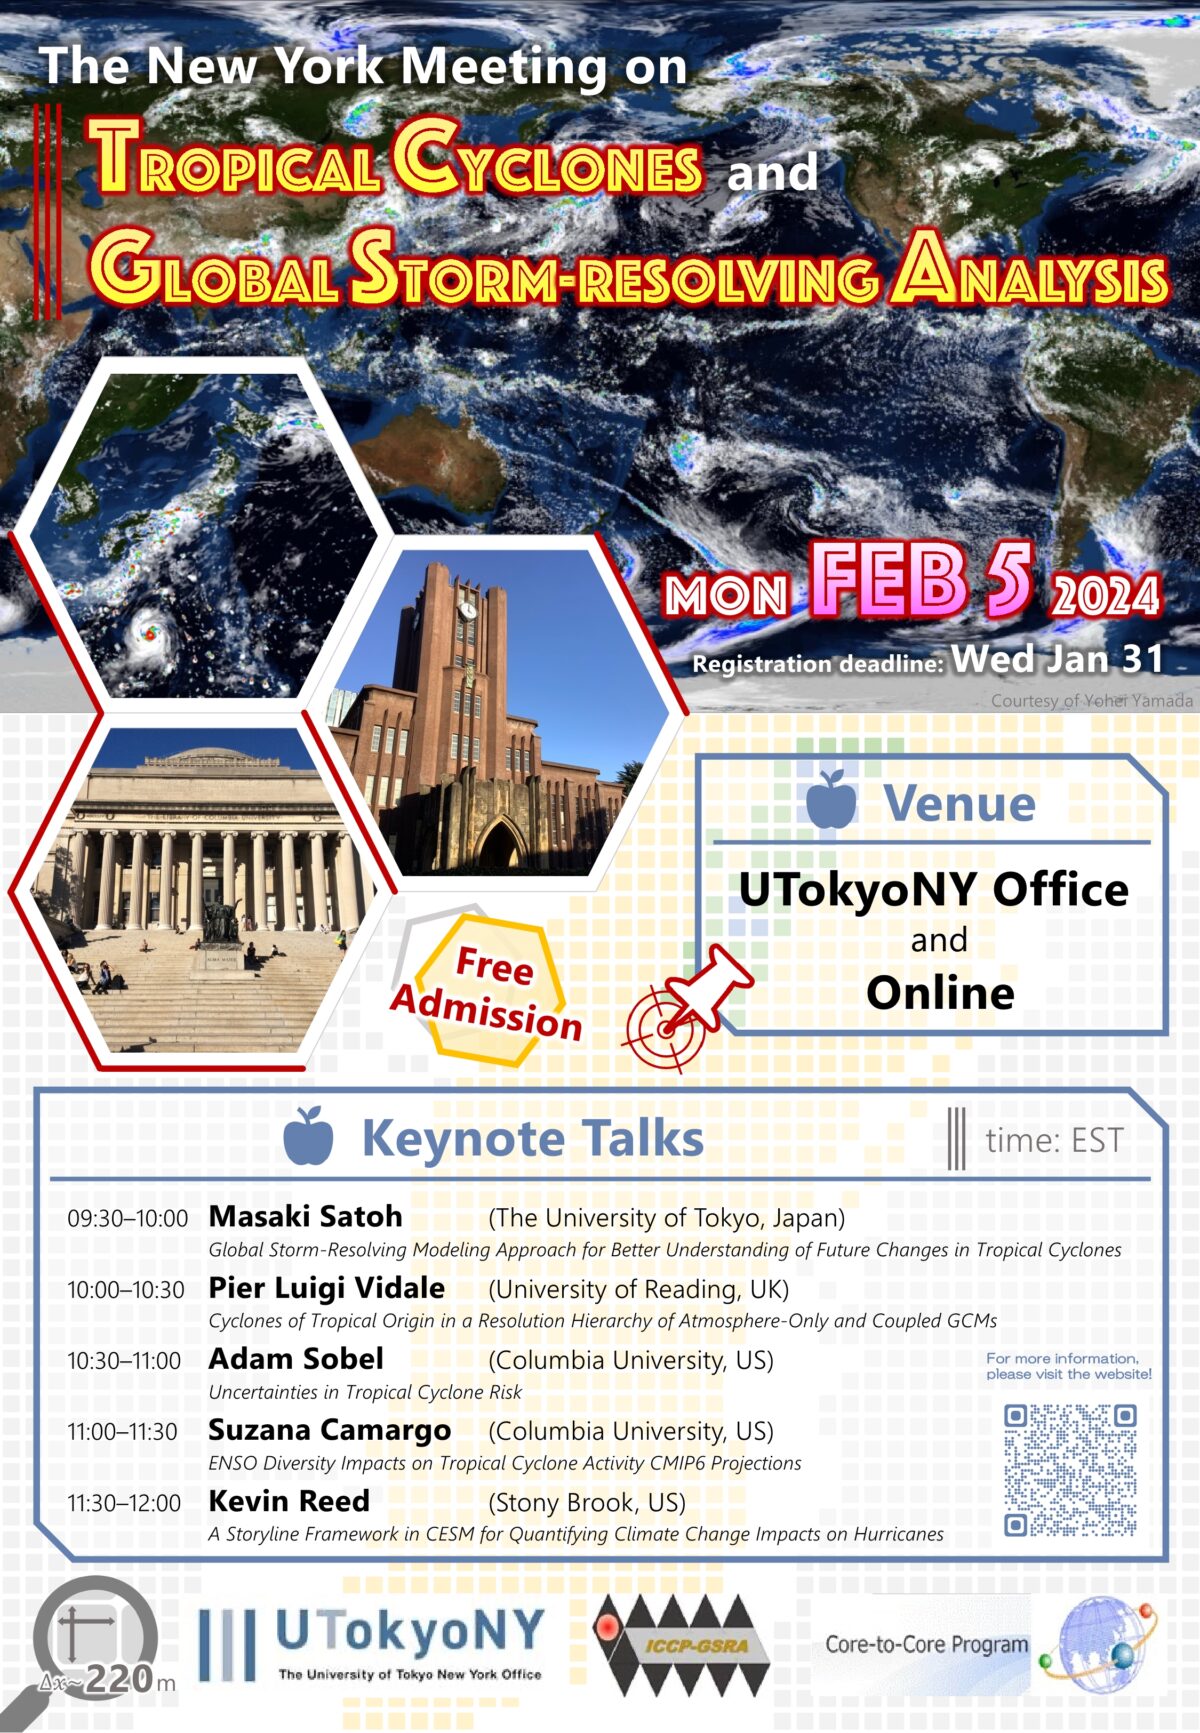 THE NEW YORK MEETING ON TROPICAL CYCLONES AND GLOBAL STORM-RESOLVING ANALYSIS